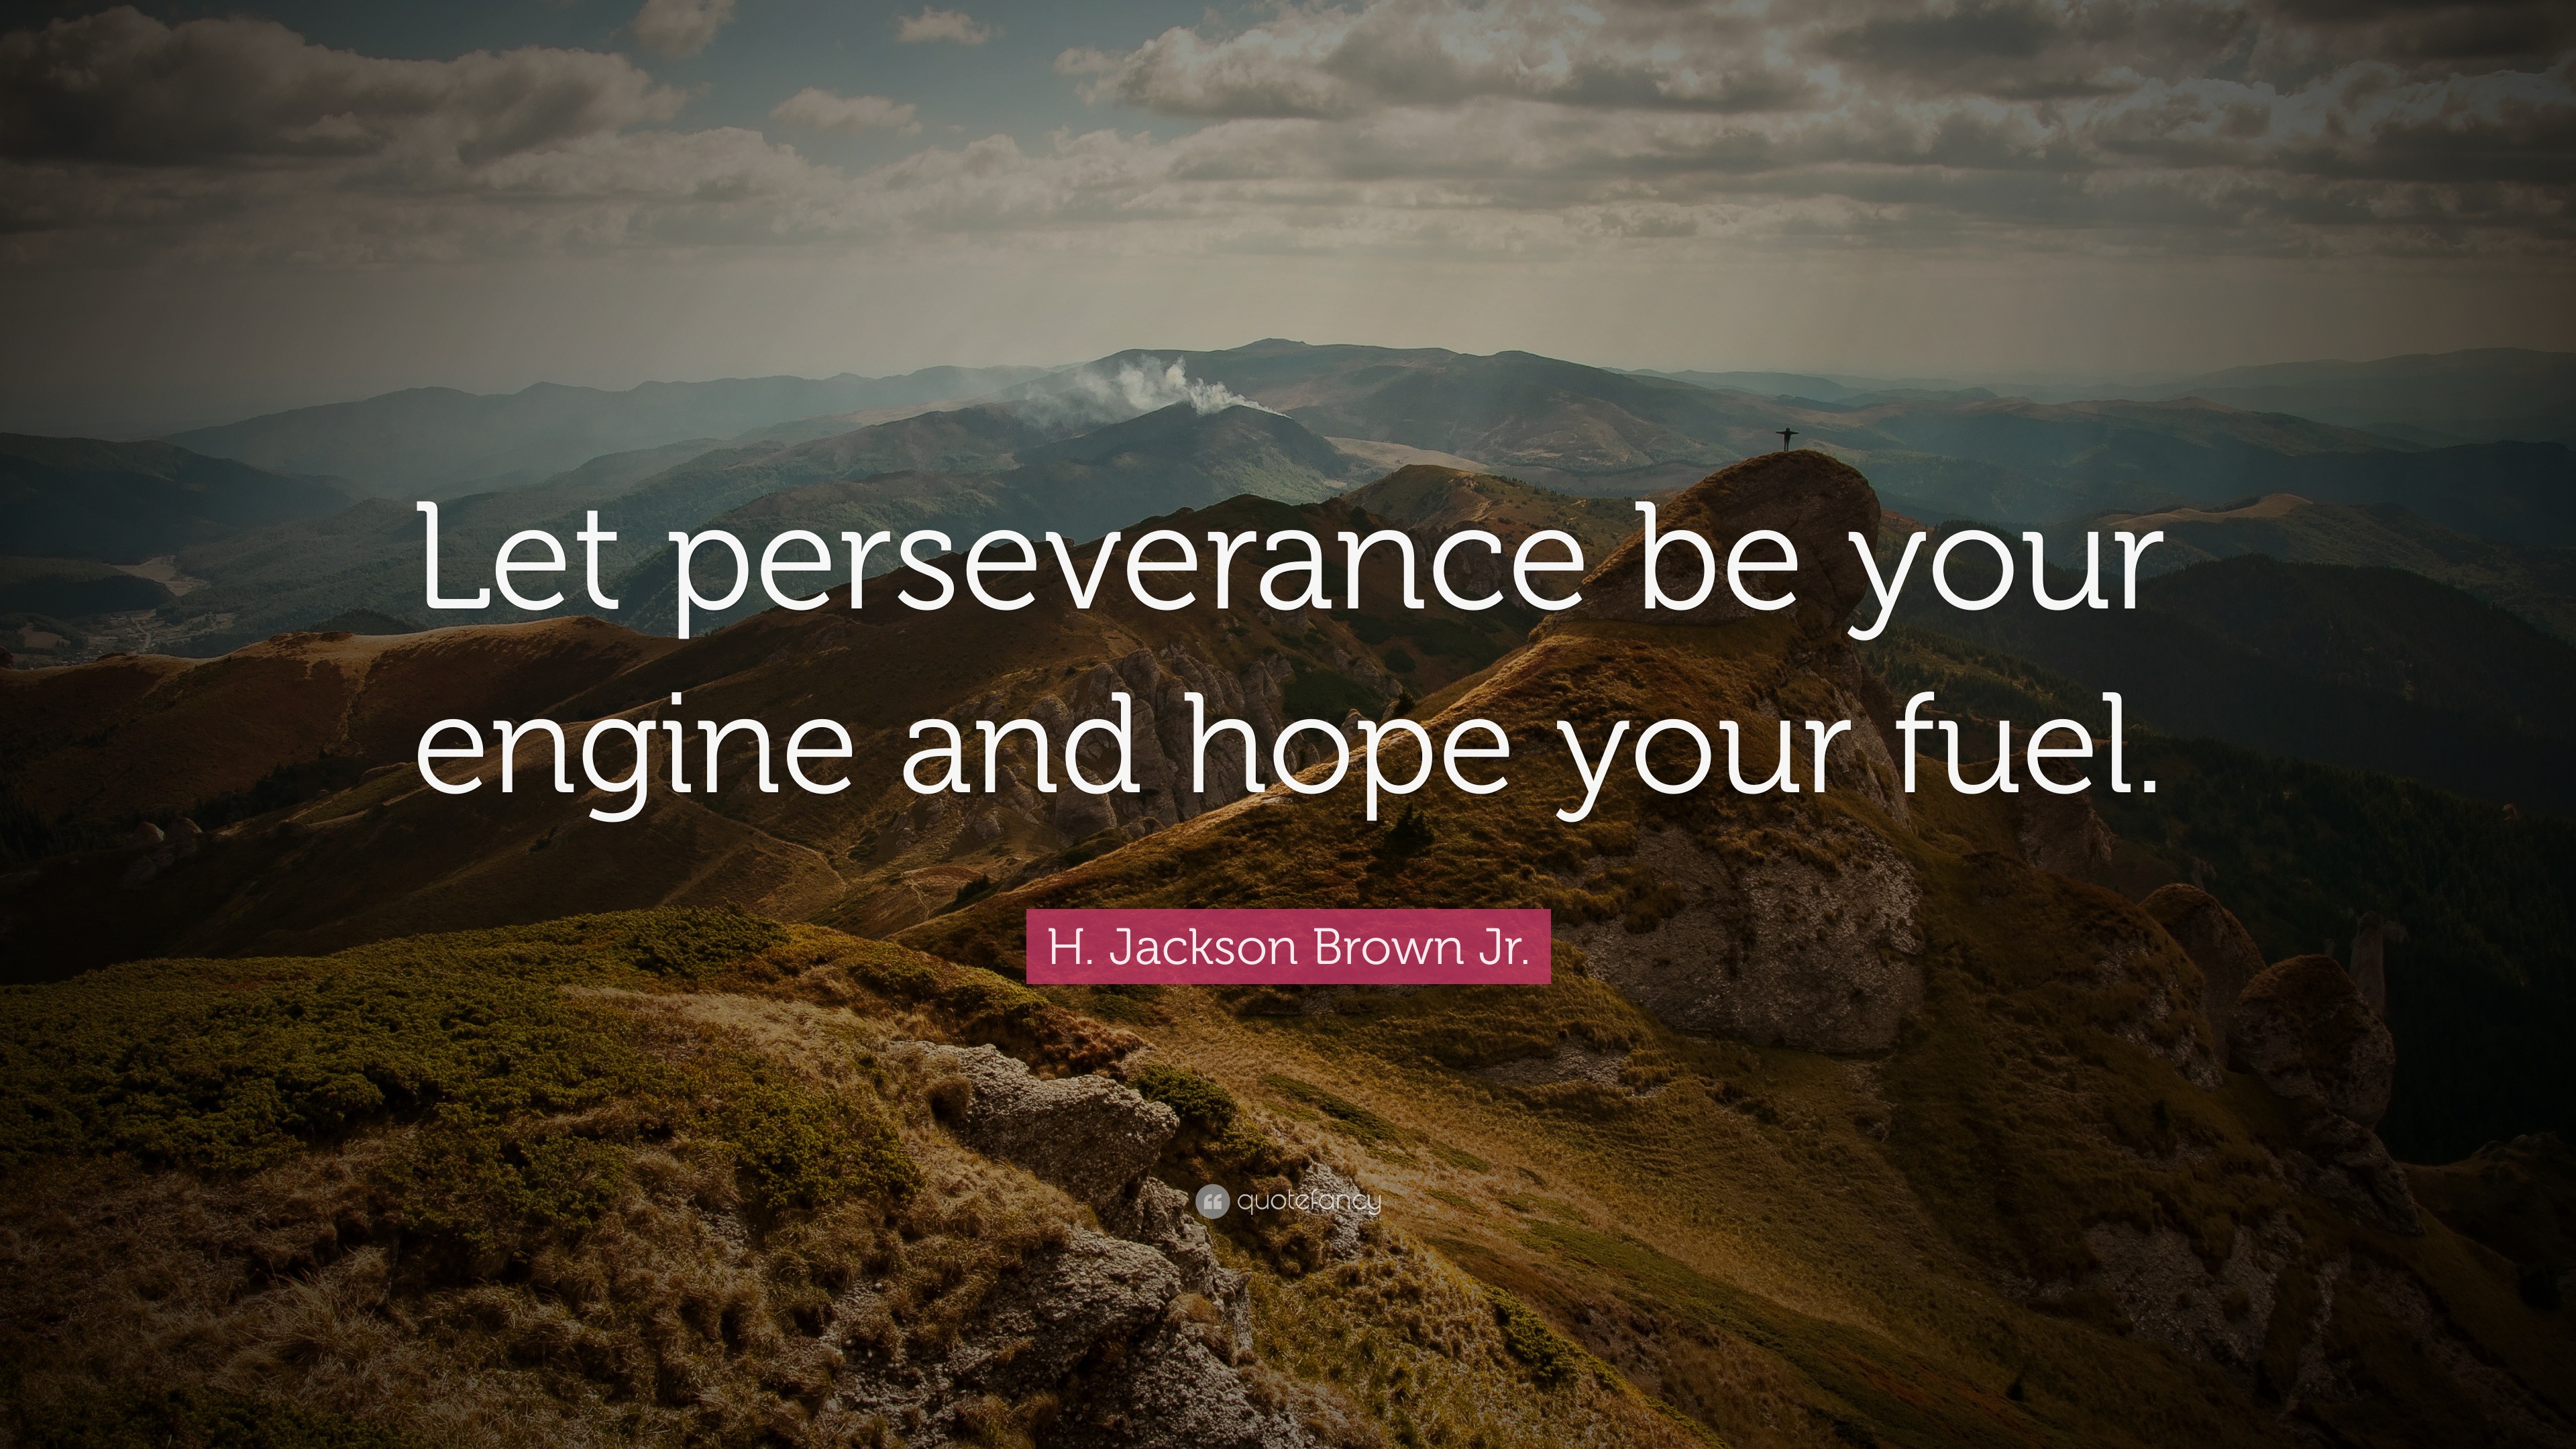 H. Jackson Brown Jr. Quote: “Let perseverance be your engine and hope